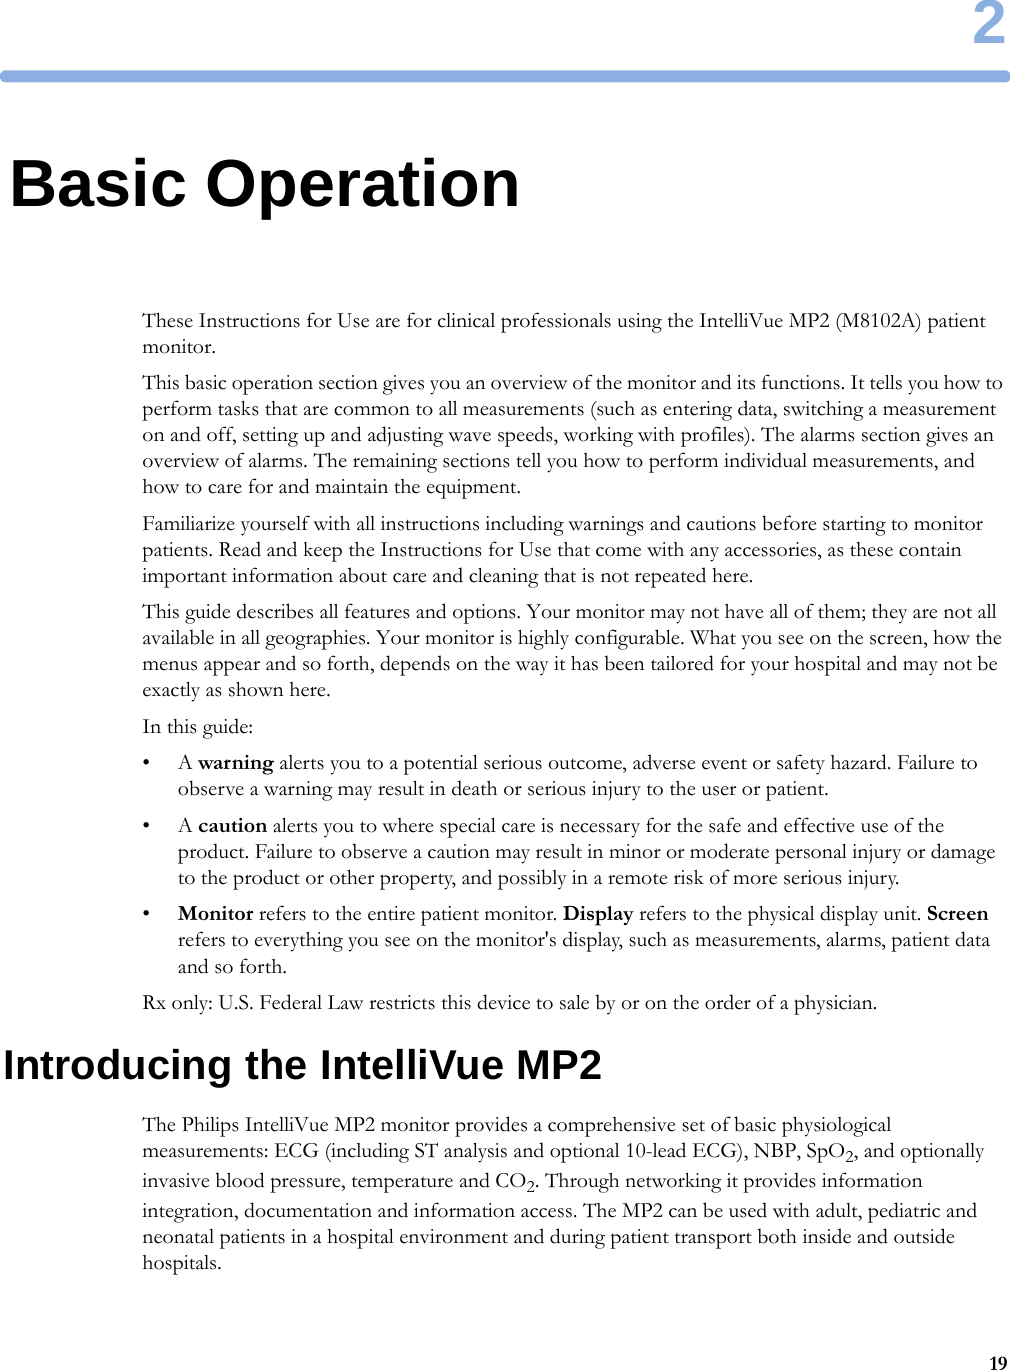 2192Basic OperationThese Instructions for Use are for clinical professionals using the IntelliVue MP2 (M8102A) patient monitor.This basic operation section gives you an overview of the monitor and its functions. It tells you how to perform tasks that are common to all measurements (such as entering data, switching a measurement on and off, setting up and adjusting wave speeds, working with profiles). The alarms section gives an overview of alarms. The remaining sections tell you how to perform individual measurements, and how to care for and maintain the equipment.Familiarize yourself with all instructions including warnings and cautions before starting to monitor patients. Read and keep the Instructions for Use that come with any accessories, as these contain important information about care and cleaning that is not repeated here.This guide describes all features and options. Your monitor may not have all of them; they are not all available in all geographies. Your monitor is highly configurable. What you see on the screen, how the menus appear and so forth, depends on the way it has been tailored for your hospital and may not be exactly as shown here.In this guide:•A warning alerts you to a potential serious outcome, adverse event or safety hazard. Failure to observe a warning may result in death or serious injury to the user or patient.•A caution alerts you to where special care is necessary for the safe and effective use of the product. Failure to observe a caution may result in minor or moderate personal injury or damage to the product or other property, and possibly in a remote risk of more serious injury.•Monitor refers to the entire patient monitor. Display refers to the physical display unit. Screen refers to everything you see on the monitor&apos;s display, such as measurements, alarms, patient data and so forth.Rx only: U.S. Federal Law restricts this device to sale by or on the order of a physician.Introducing the IntelliVue MP2The Philips IntelliVue MP2 monitor provides a comprehensive set of basic physiological measurements: ECG (including ST analysis and optional 10-lead ECG), NBP, SpO2, and optionally invasive blood pressure, temperature and CO2. Through networking it provides information integration, documentation and information access. The MP2 can be used with adult, pediatric and neonatal patients in a hospital environment and during patient transport both inside and outside hospitals.